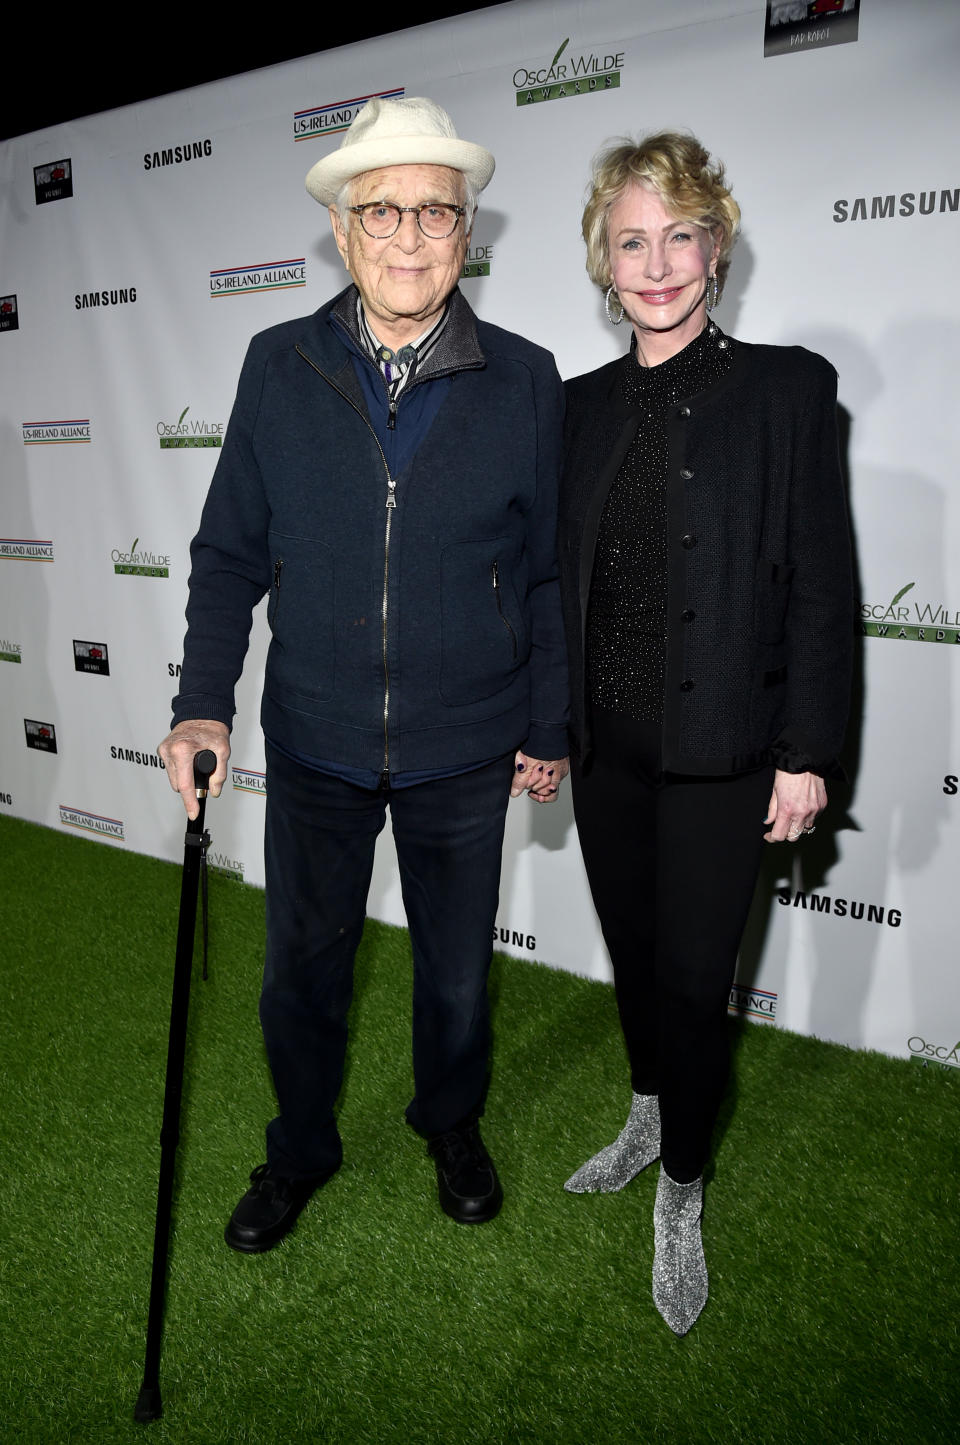 SANTA MONICA, CALIFORNIA - FEBRUARY 06: (L-R) Norman Lear and Lyn Lear attend the Oscar Wilde Awards 2020 at Bad Robot on February 06, 2020 in Santa Monica, California. (Photo by Alberto E. Rodriguez/Getty Images for US-Ireland Alliance)